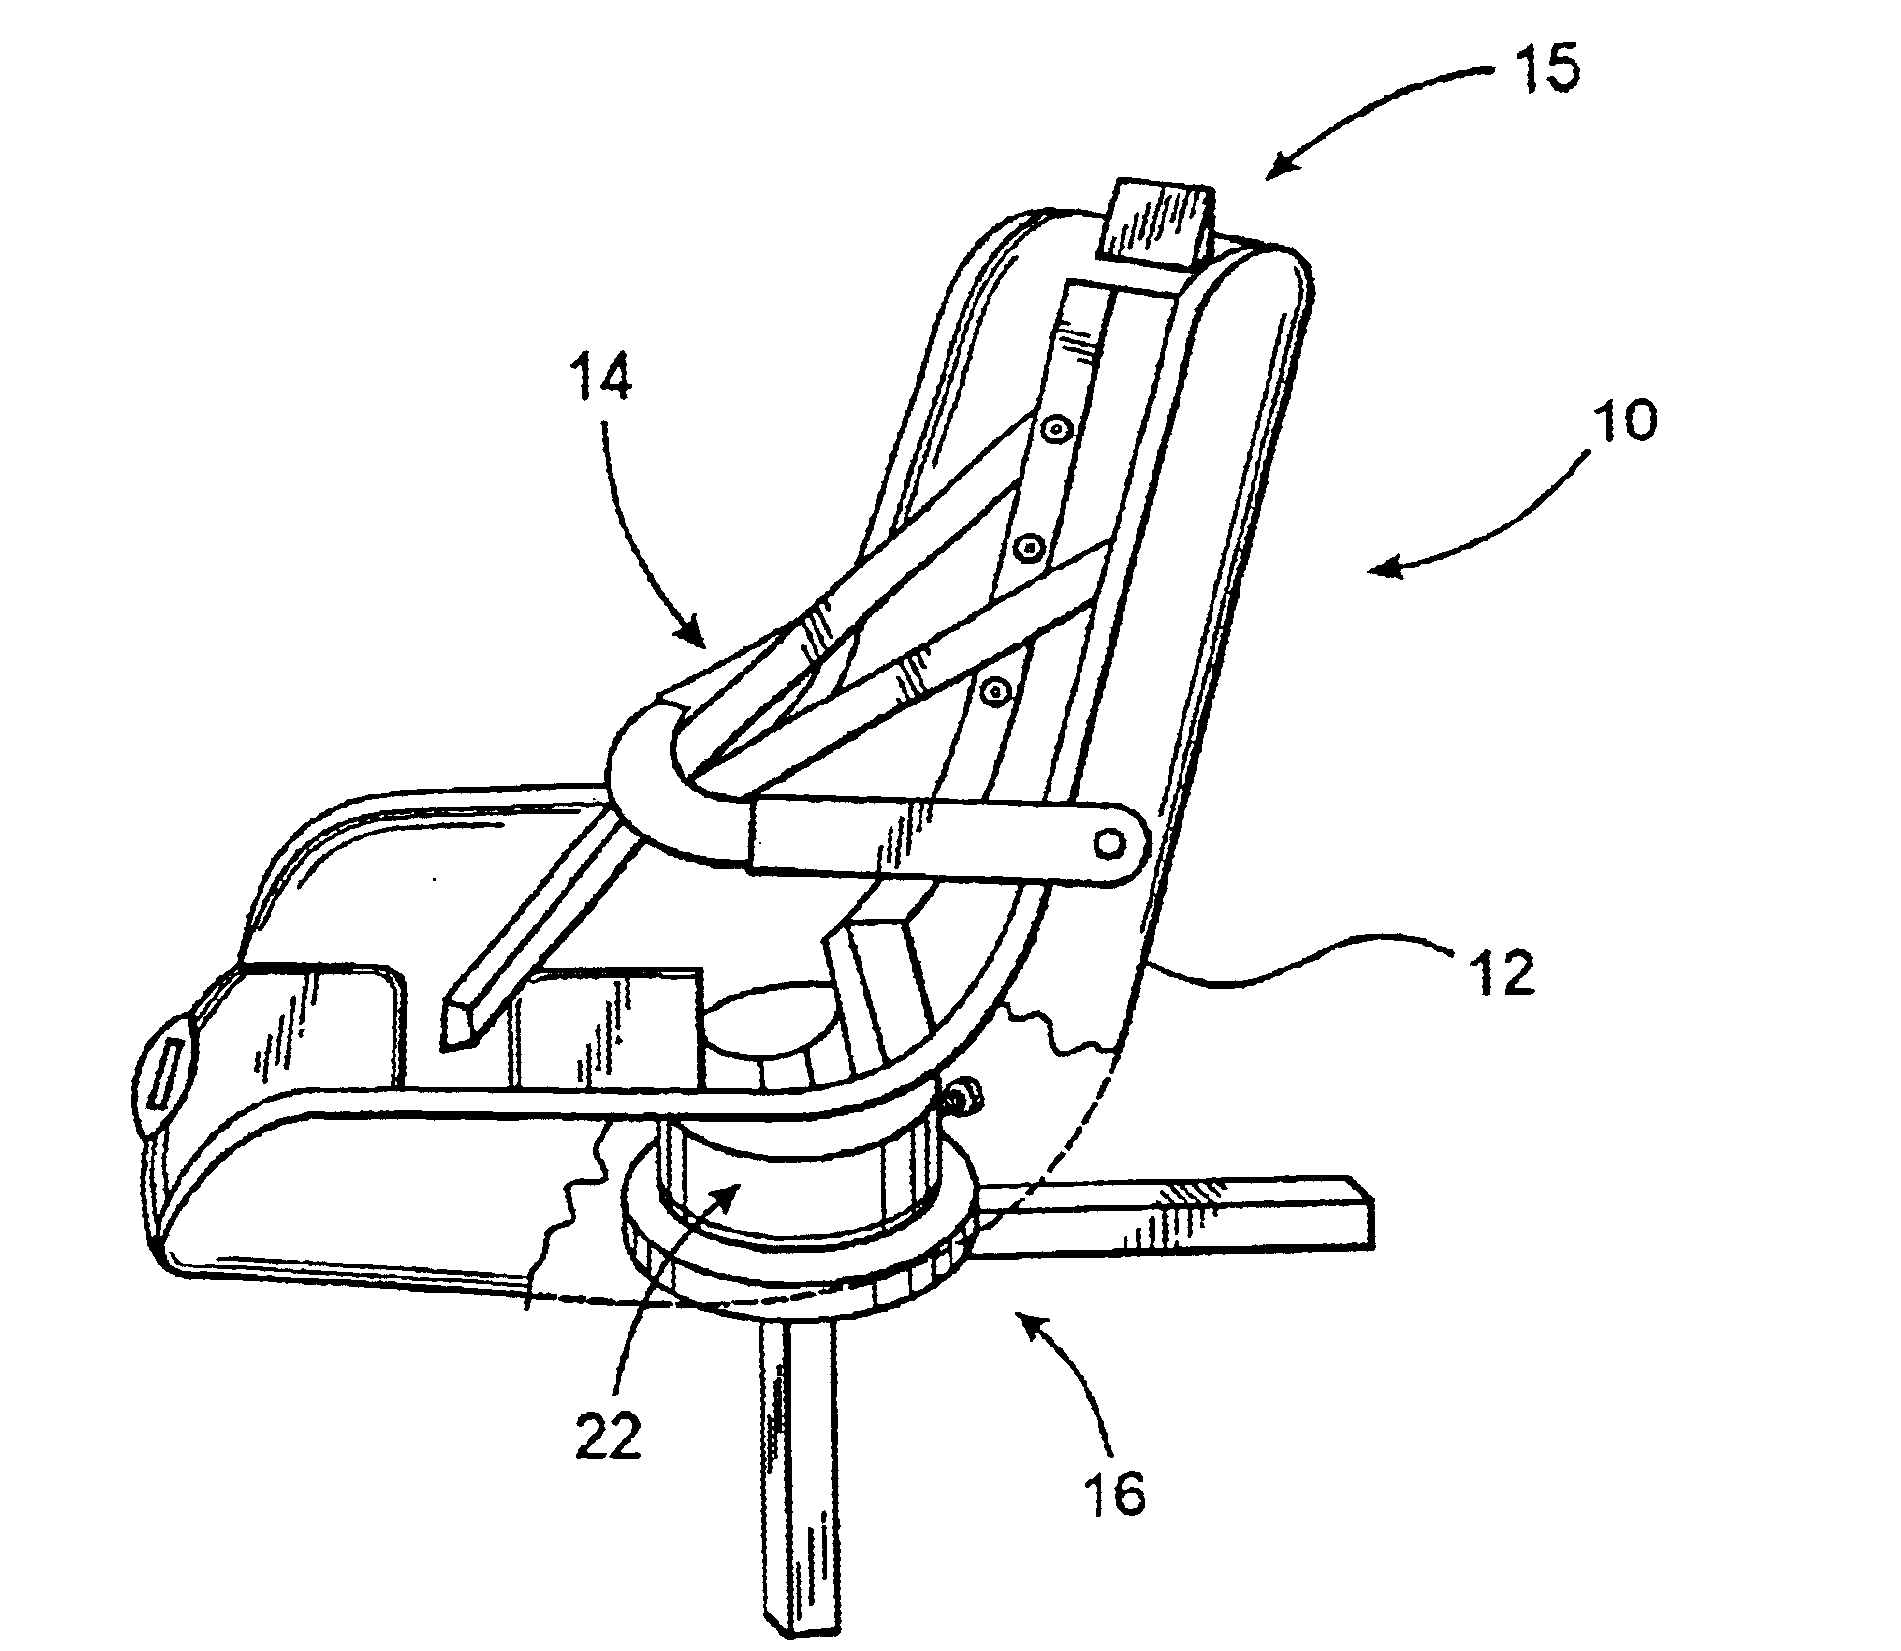 Safety seat for a marine craft or other vehicle